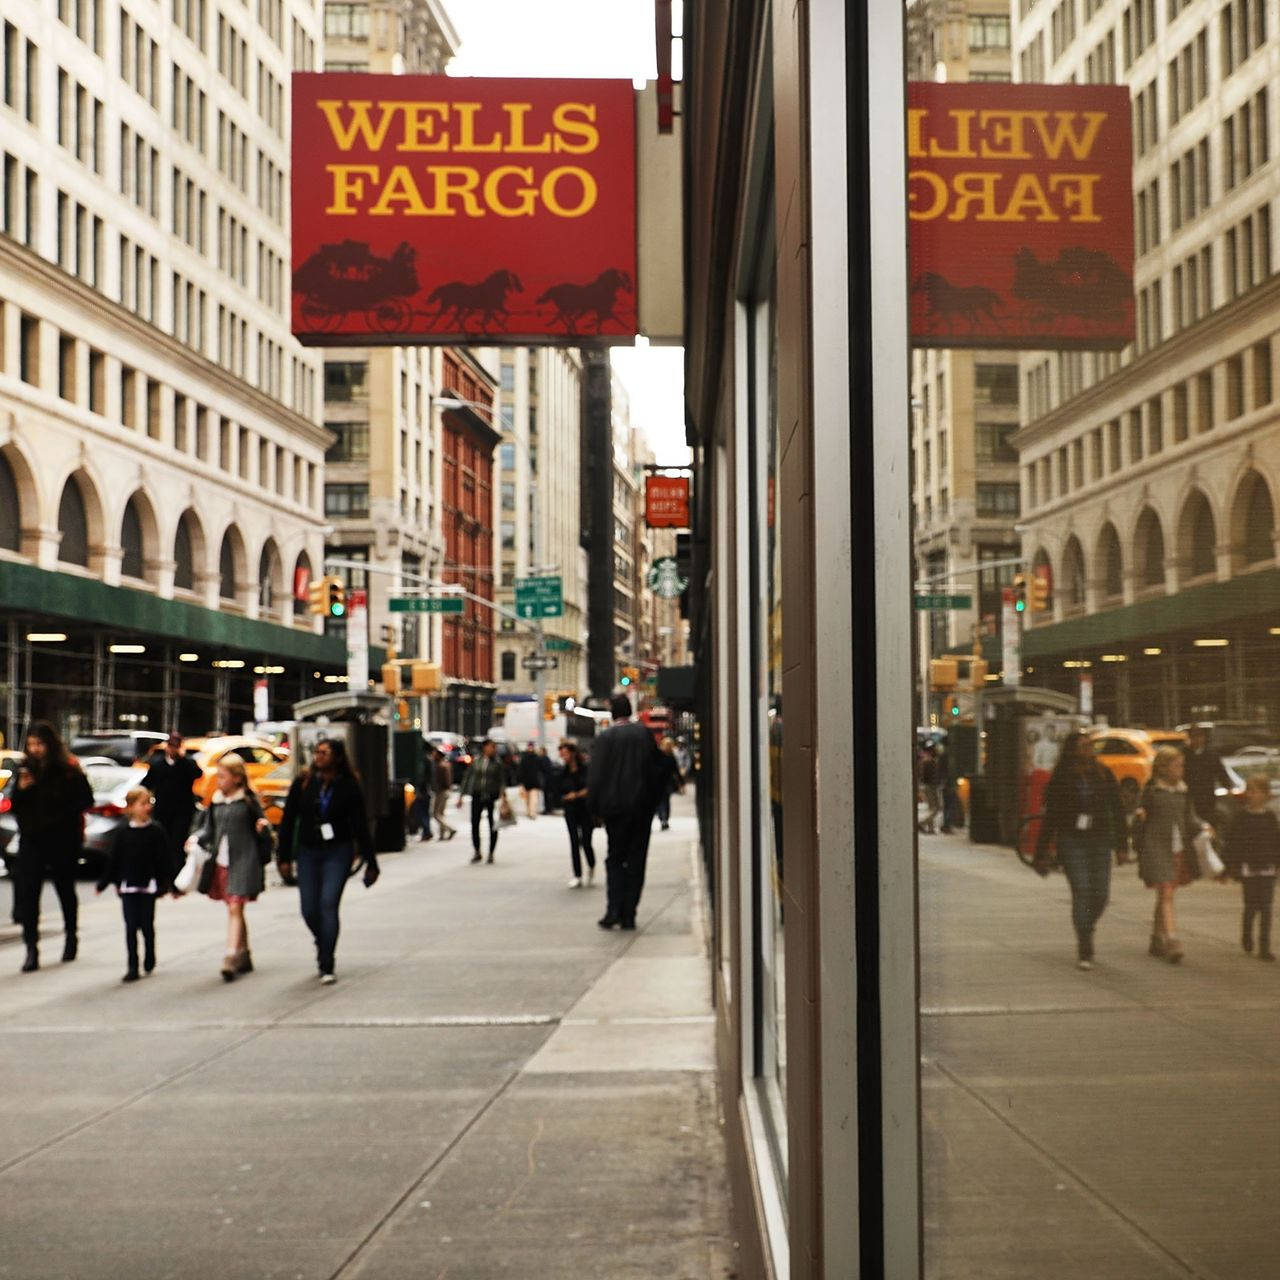 Wells Fargo bank sign on busy street with commuters Wallpaper